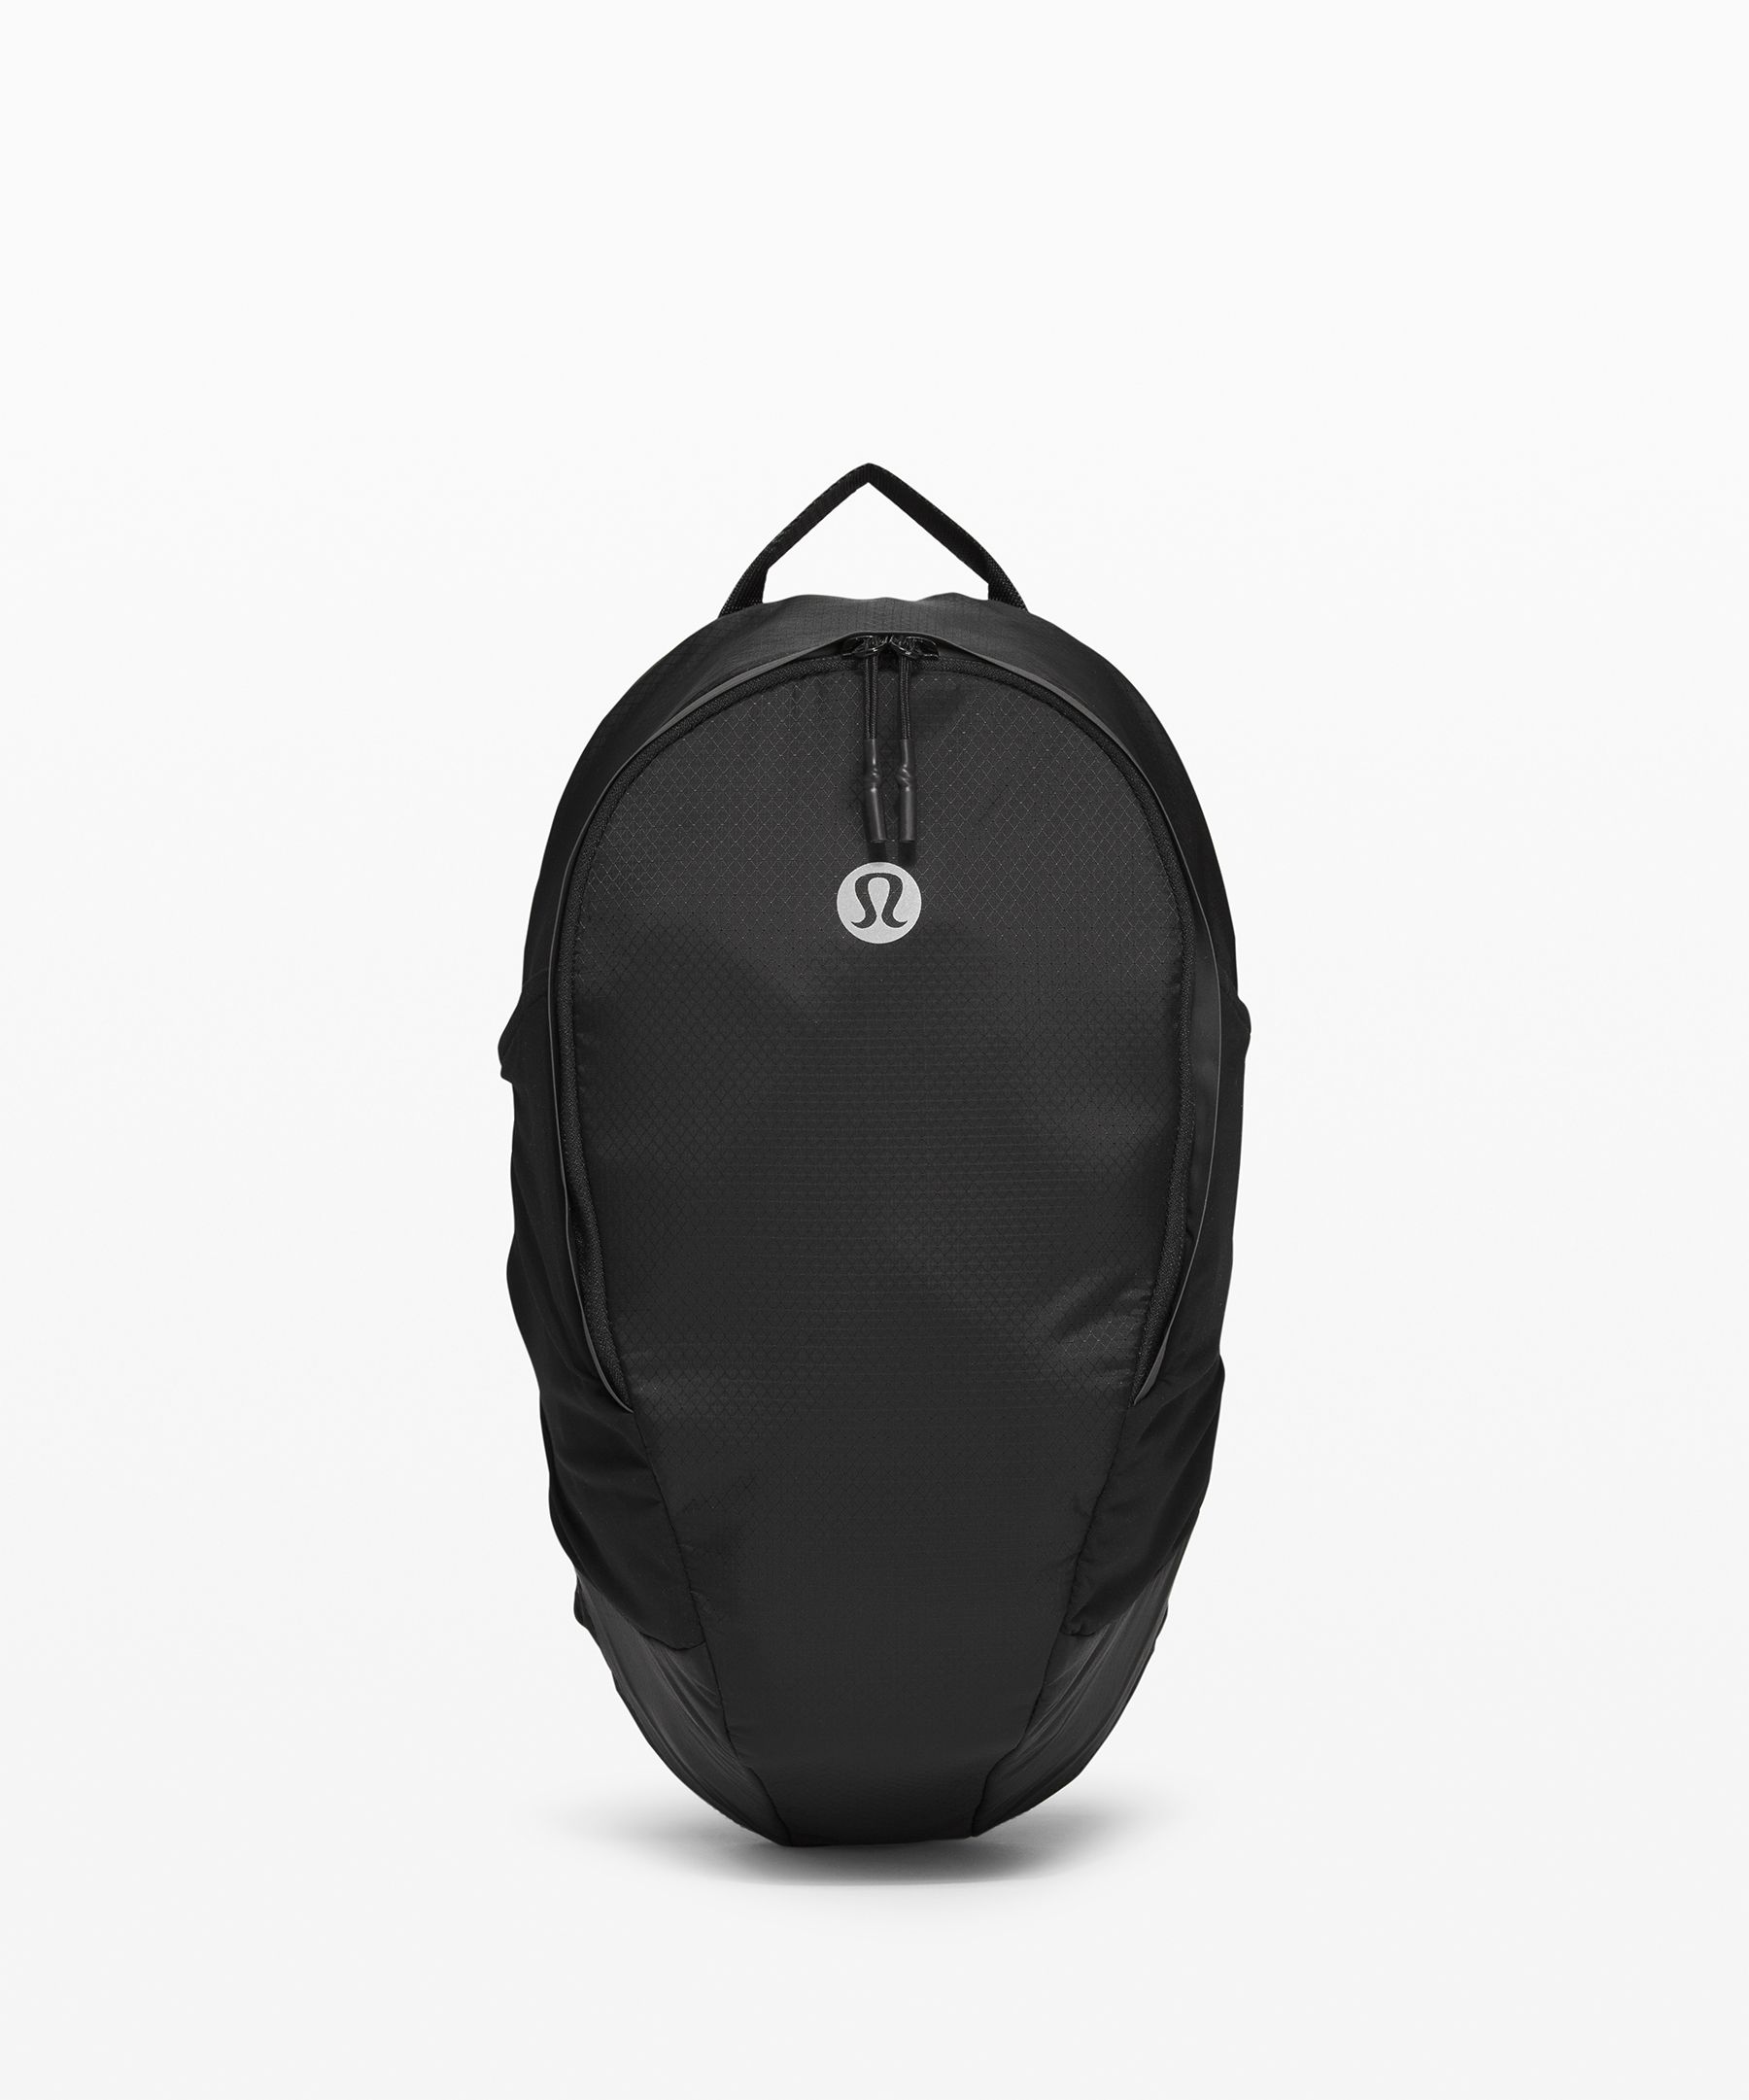 Lululemon Fast And Free Backpack In Black